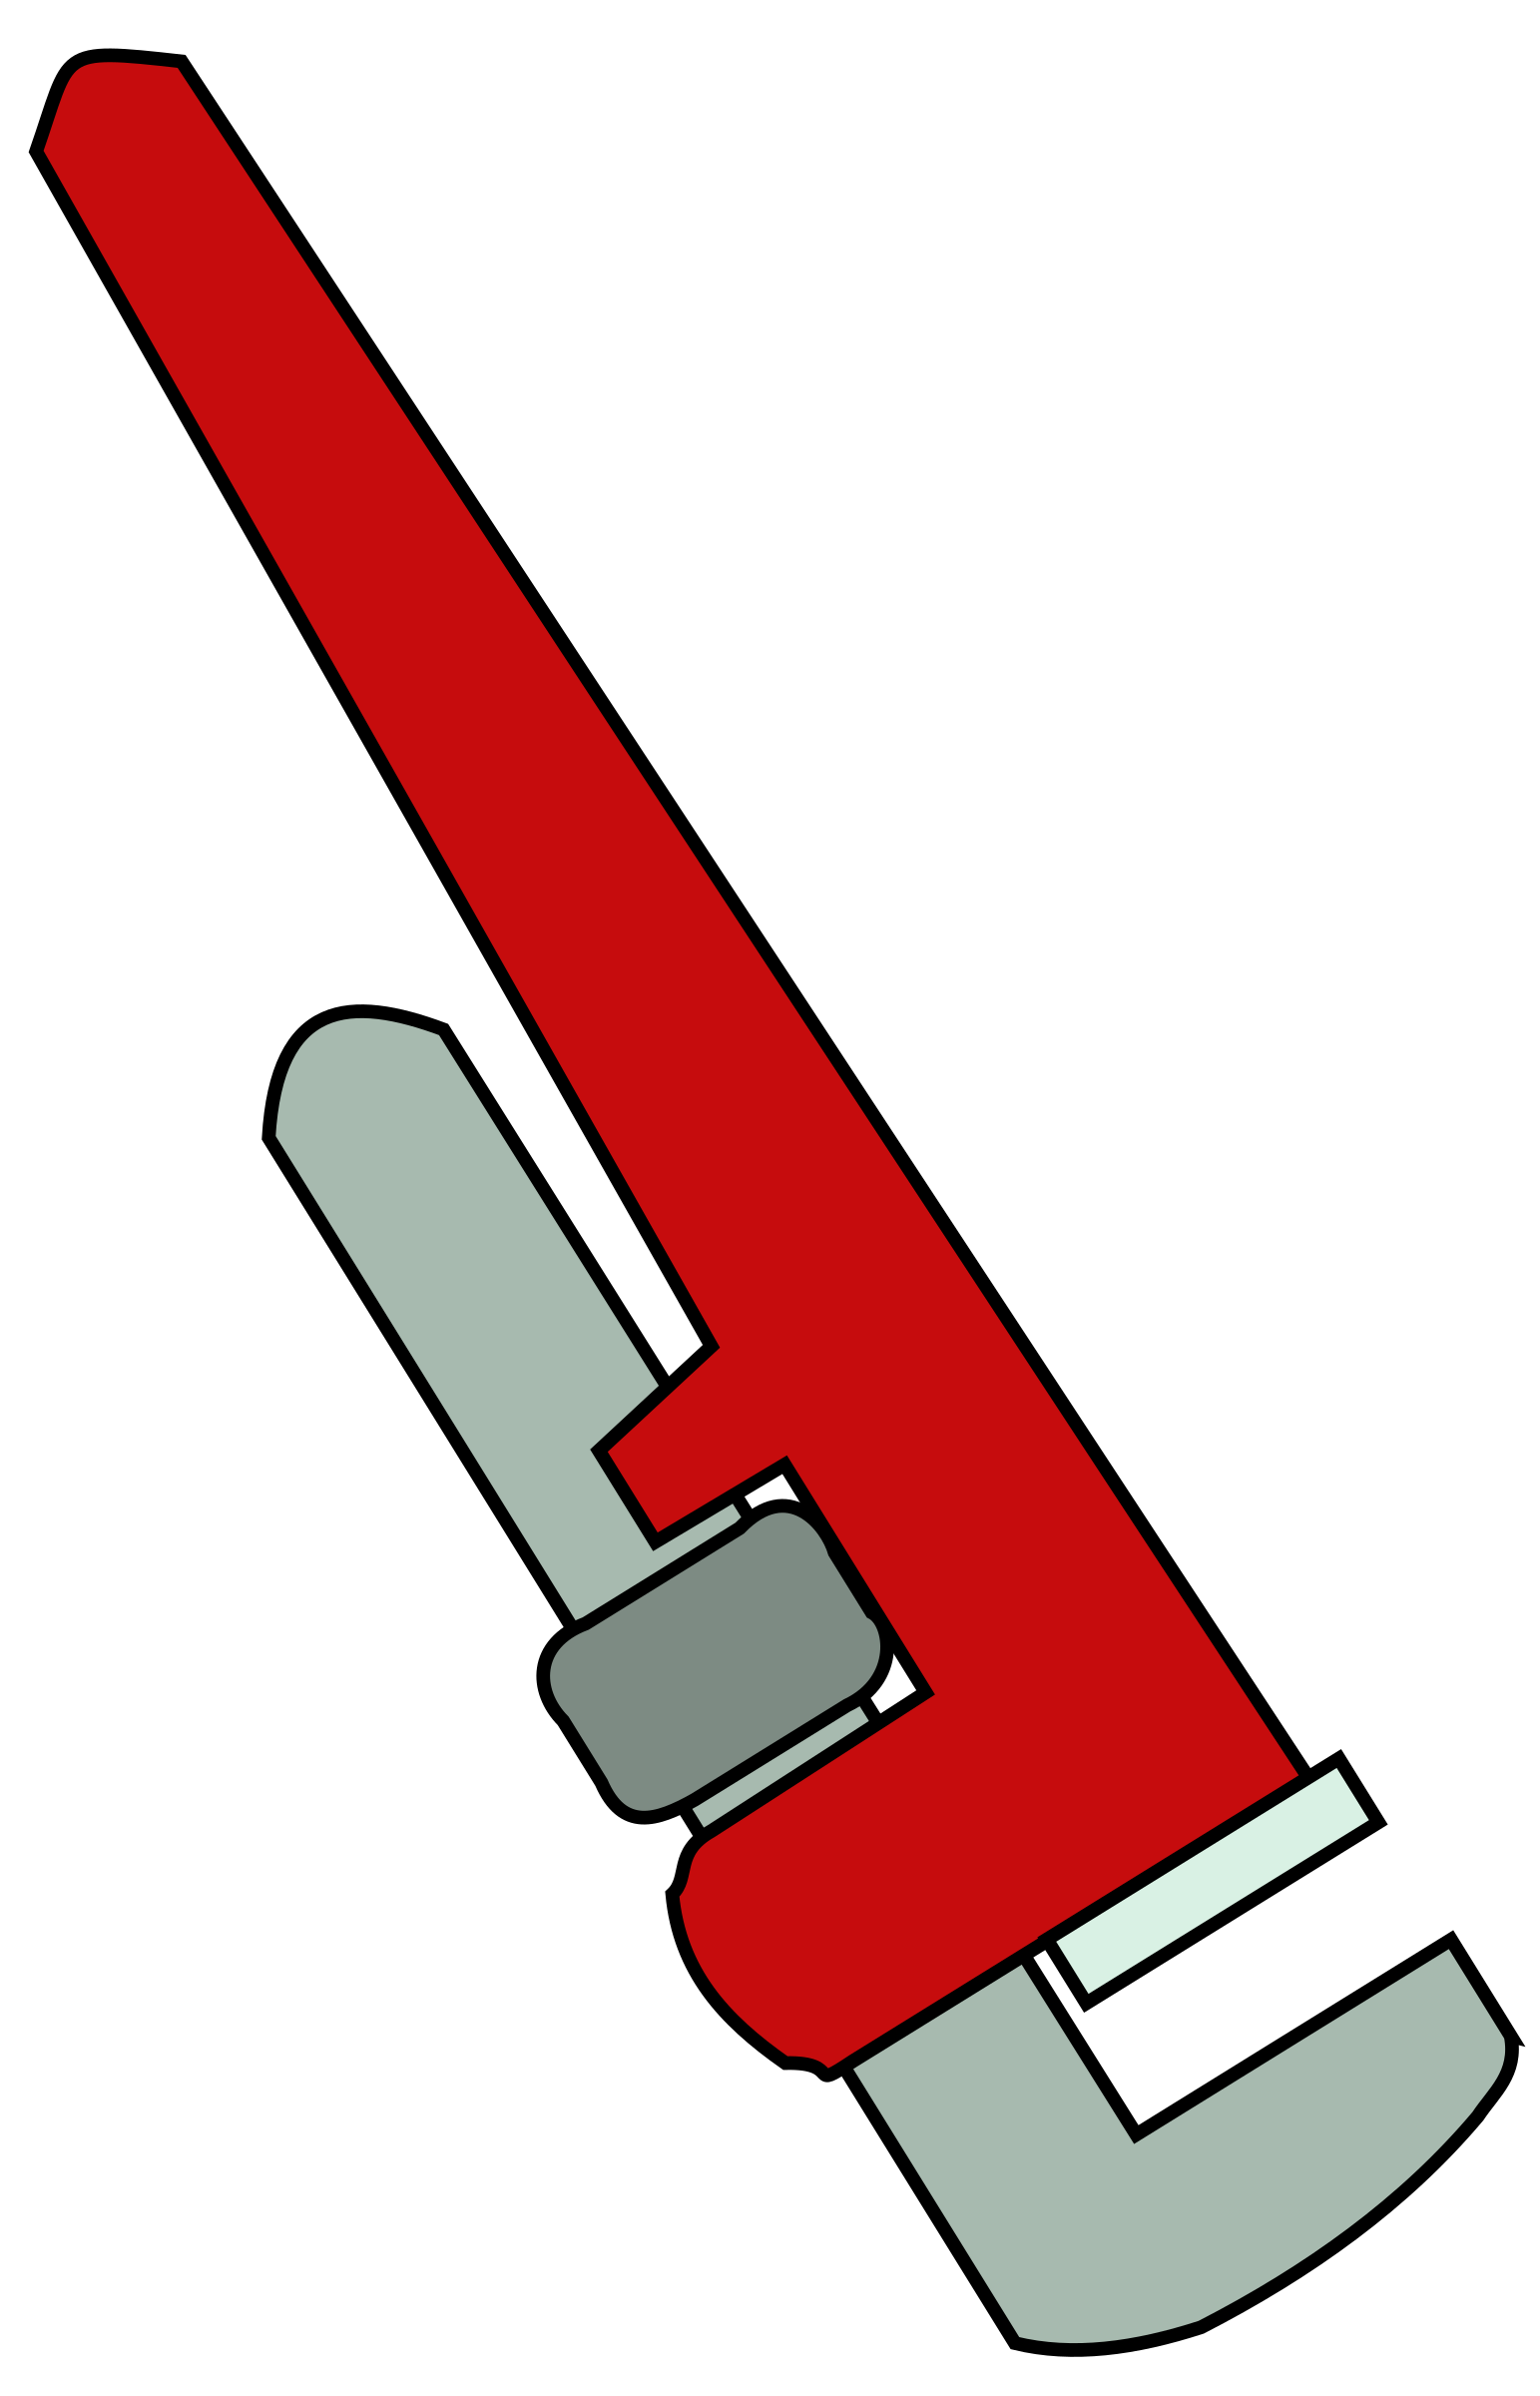 Guitar clipart bitmap. Pipe wrench by bnielsen